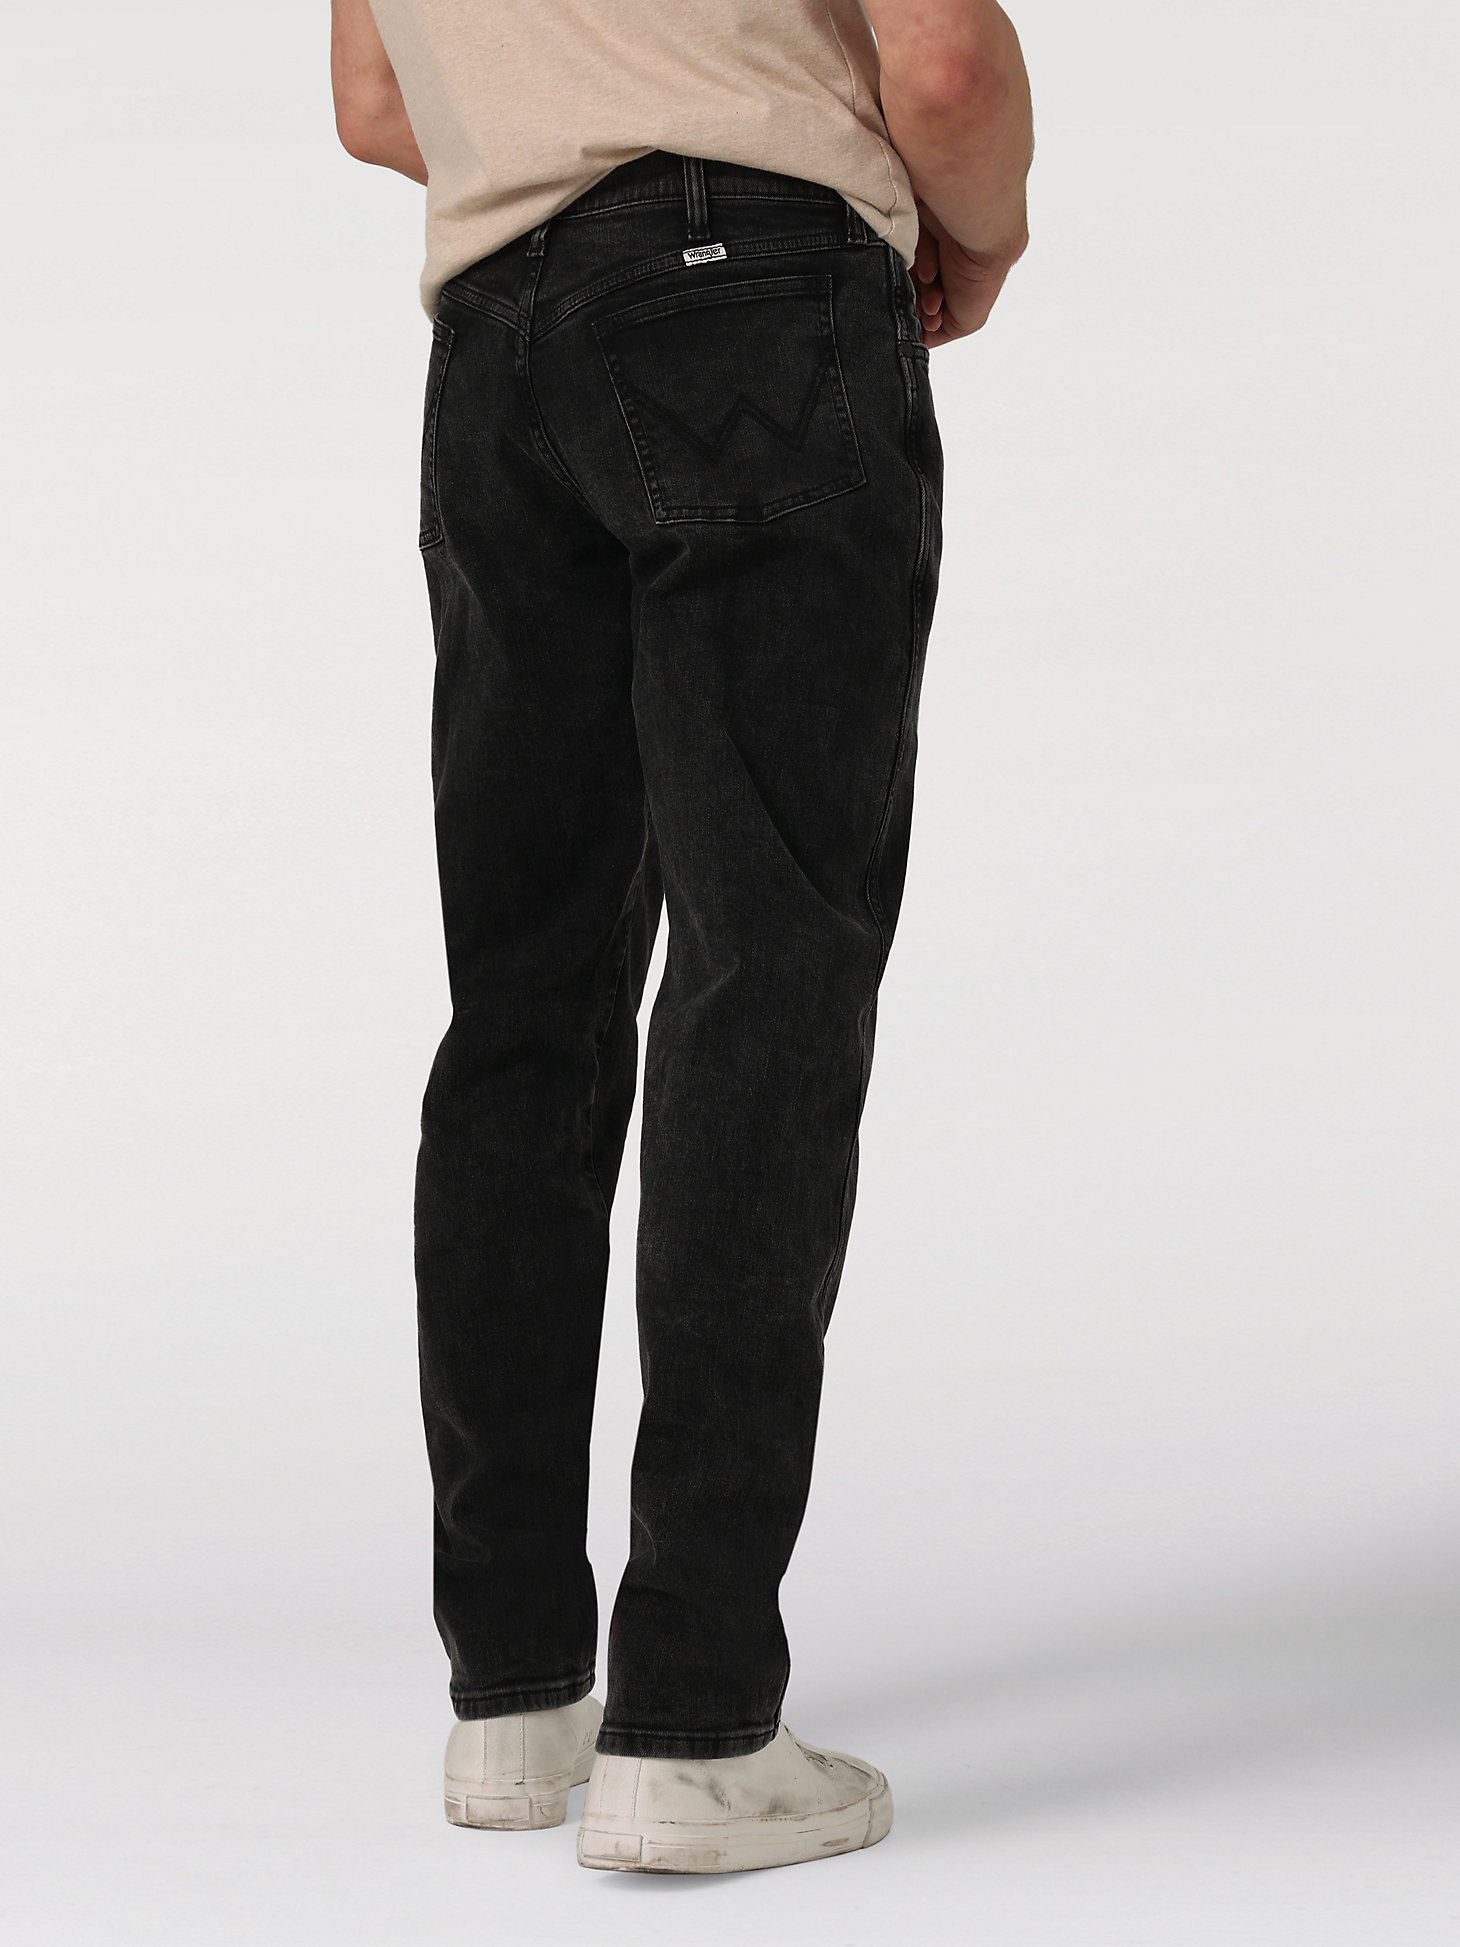 Men's Relaxed Taper Jean in Frosted Black alternative view 1